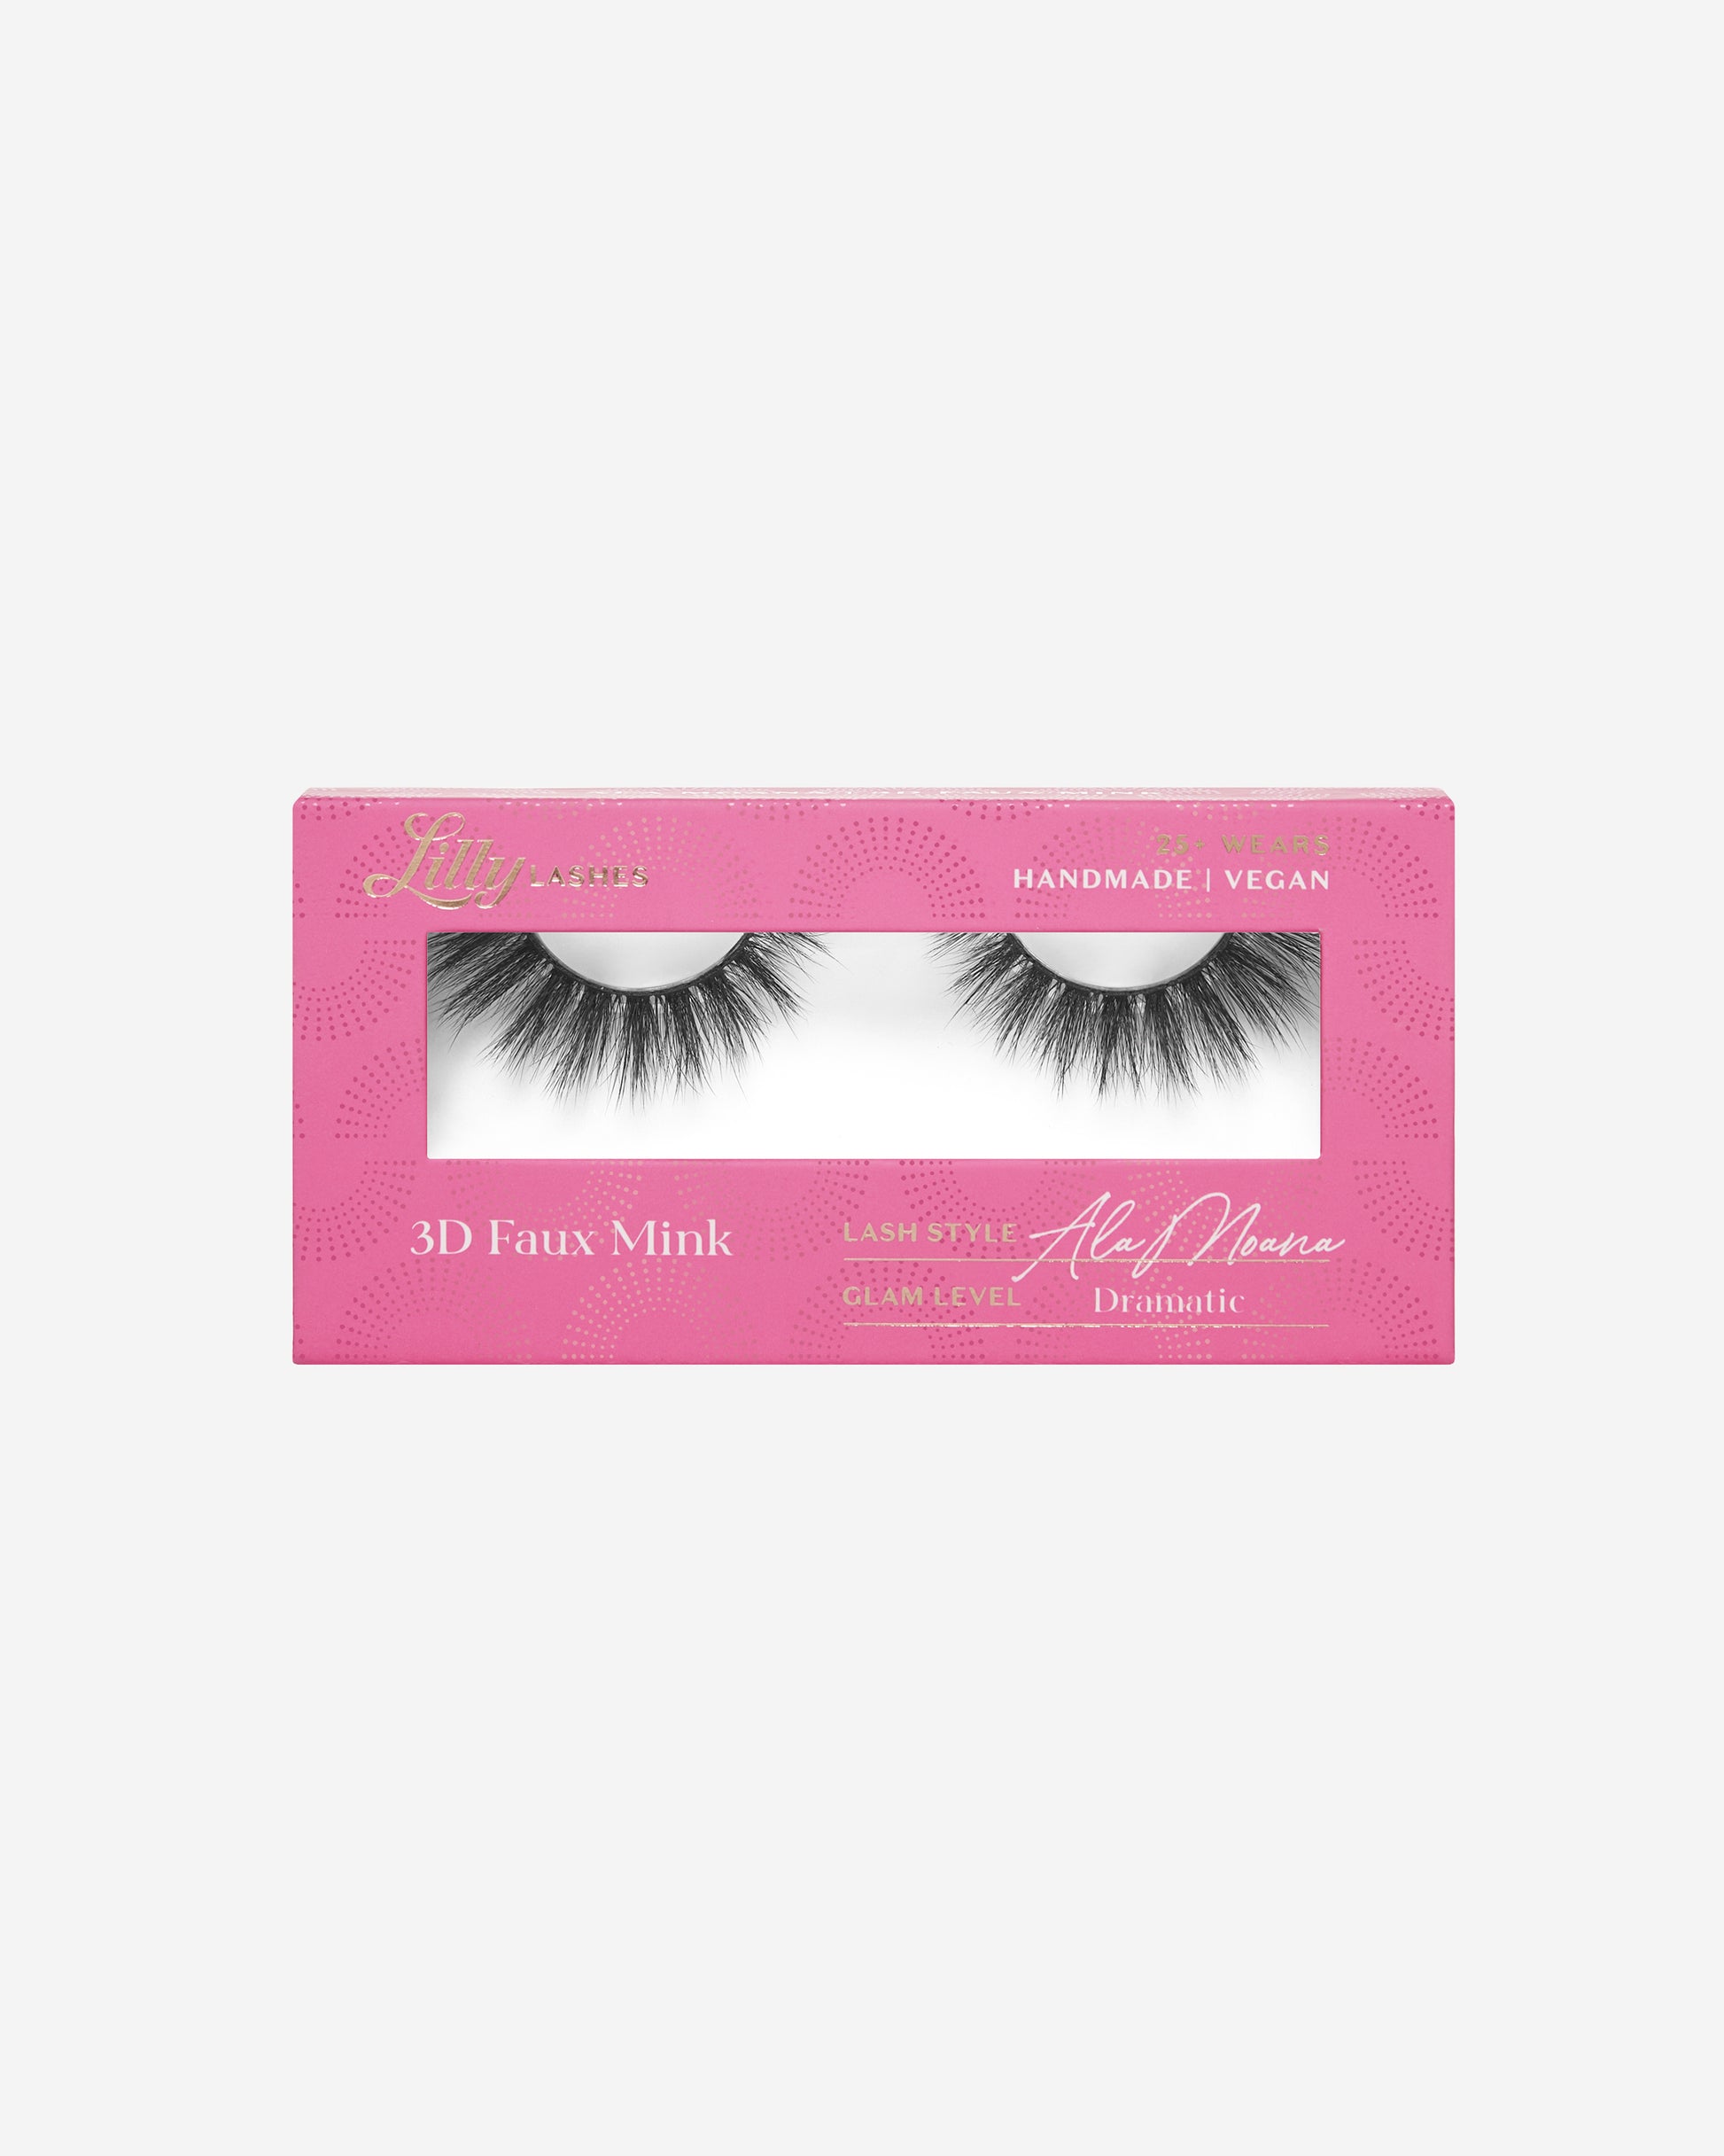 Lilly Lashes | Sephora Exclusive | Ala Moana | Front of Box